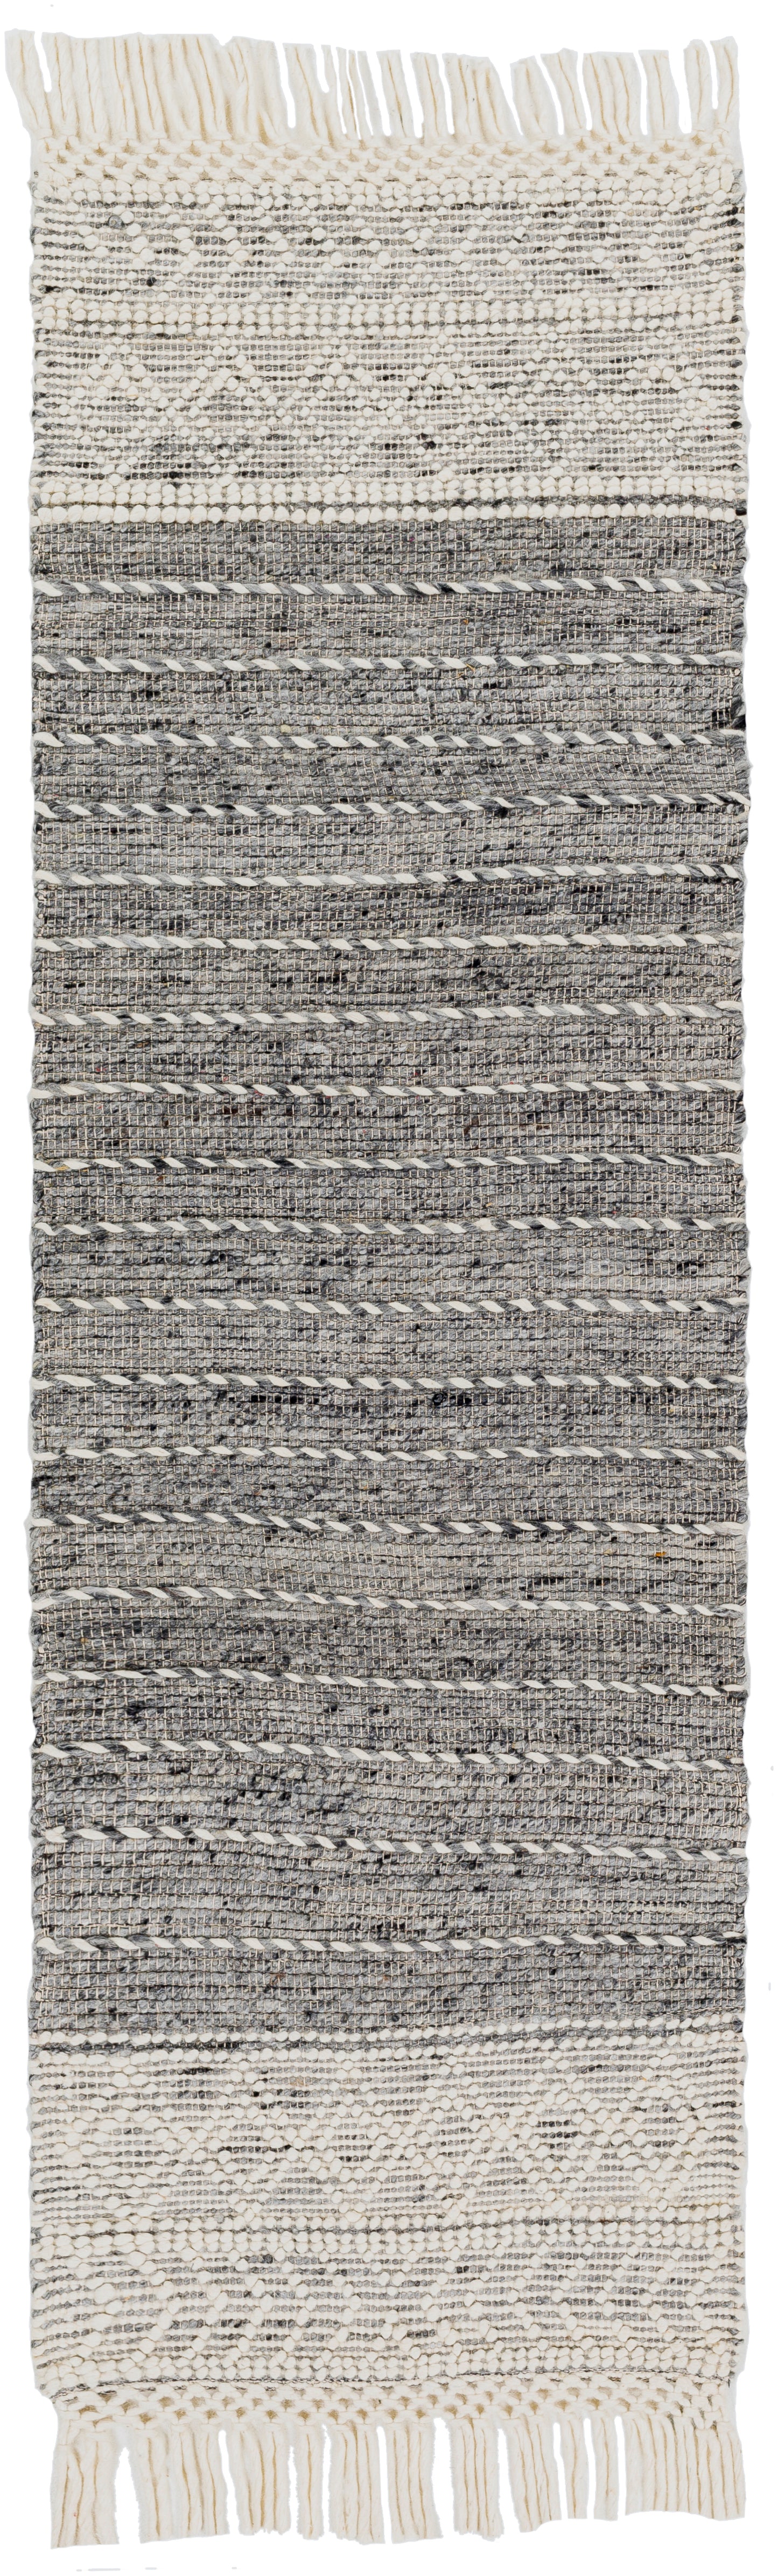 Lucia 30188 Hand Woven Wool Indoor Area Rug by Surya Rugs